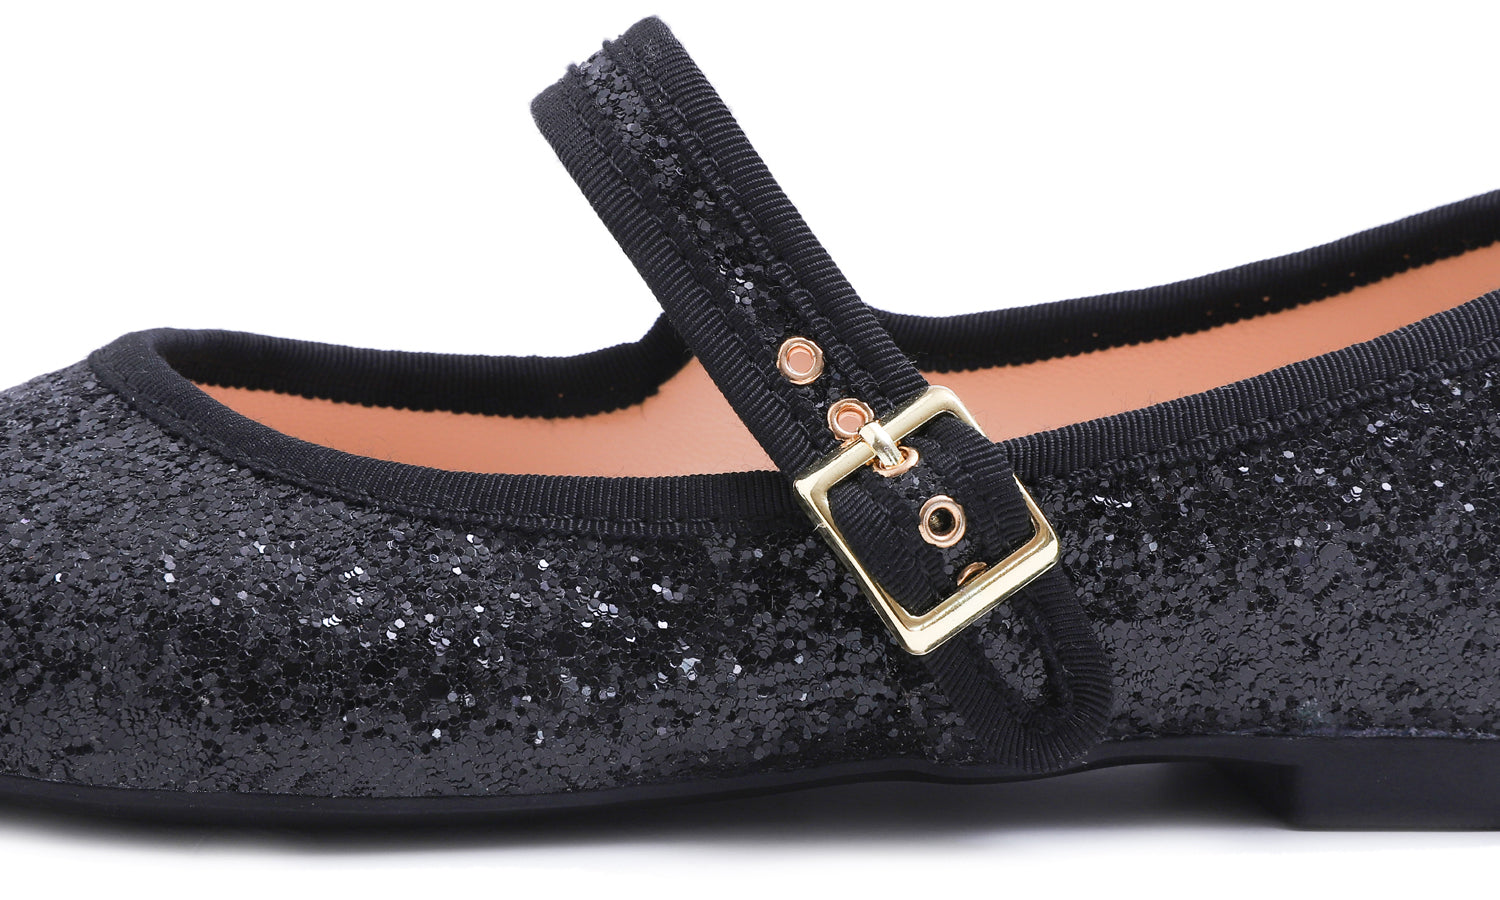 Feversole Women's Soft Cushion Extra Padded Comfort Round Toe Mary Jane Metal Buckle Fashion Ballet Flats Walking Shoes Black Glitter